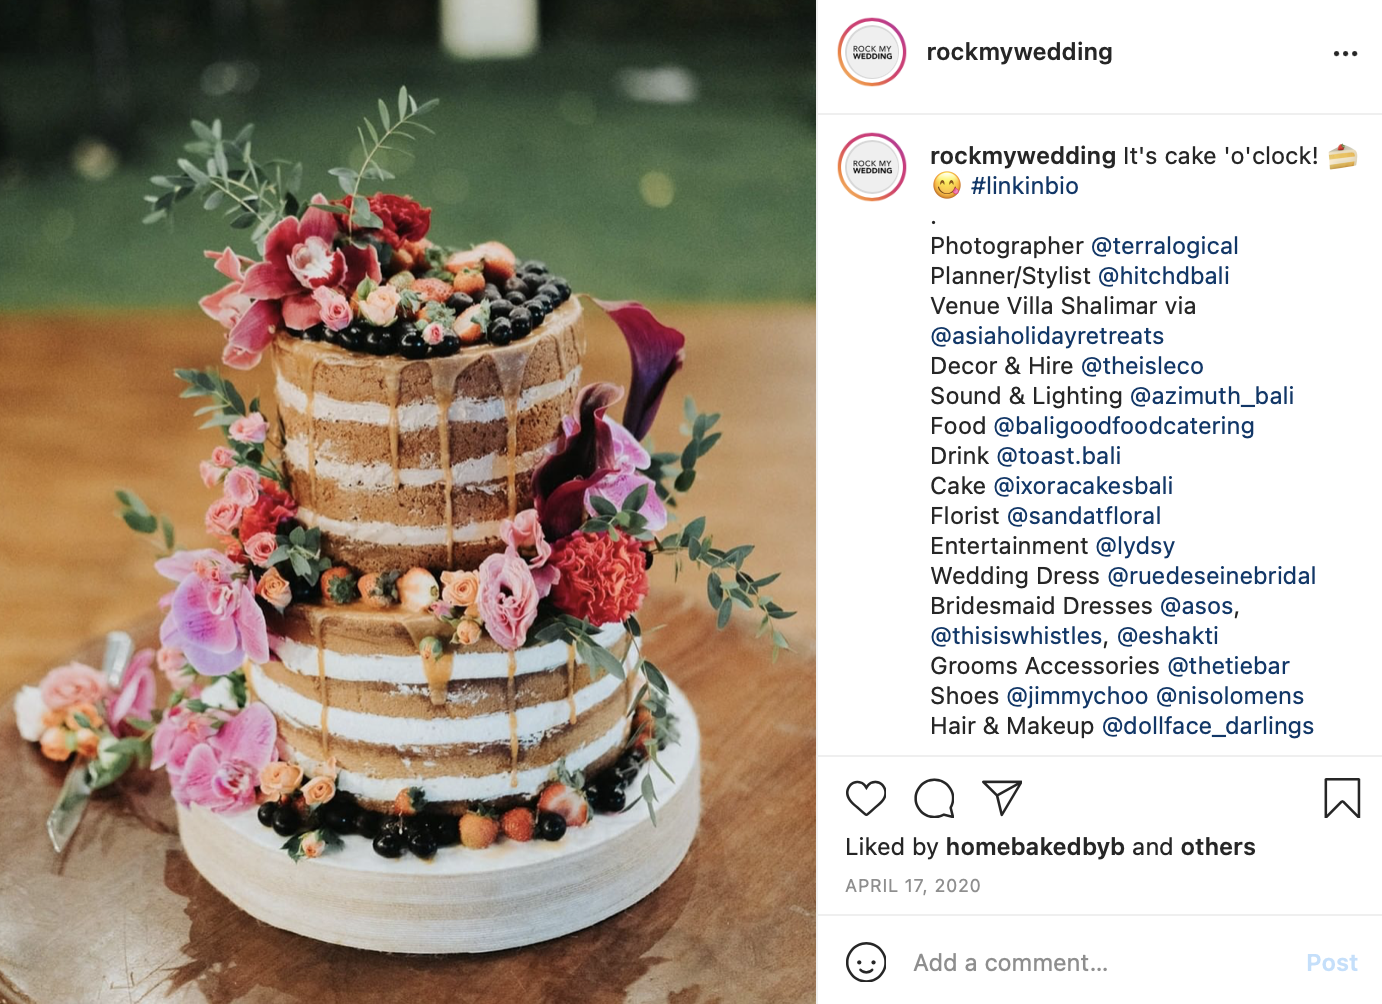 an unfrosted, or naked, cake at a wedding reception